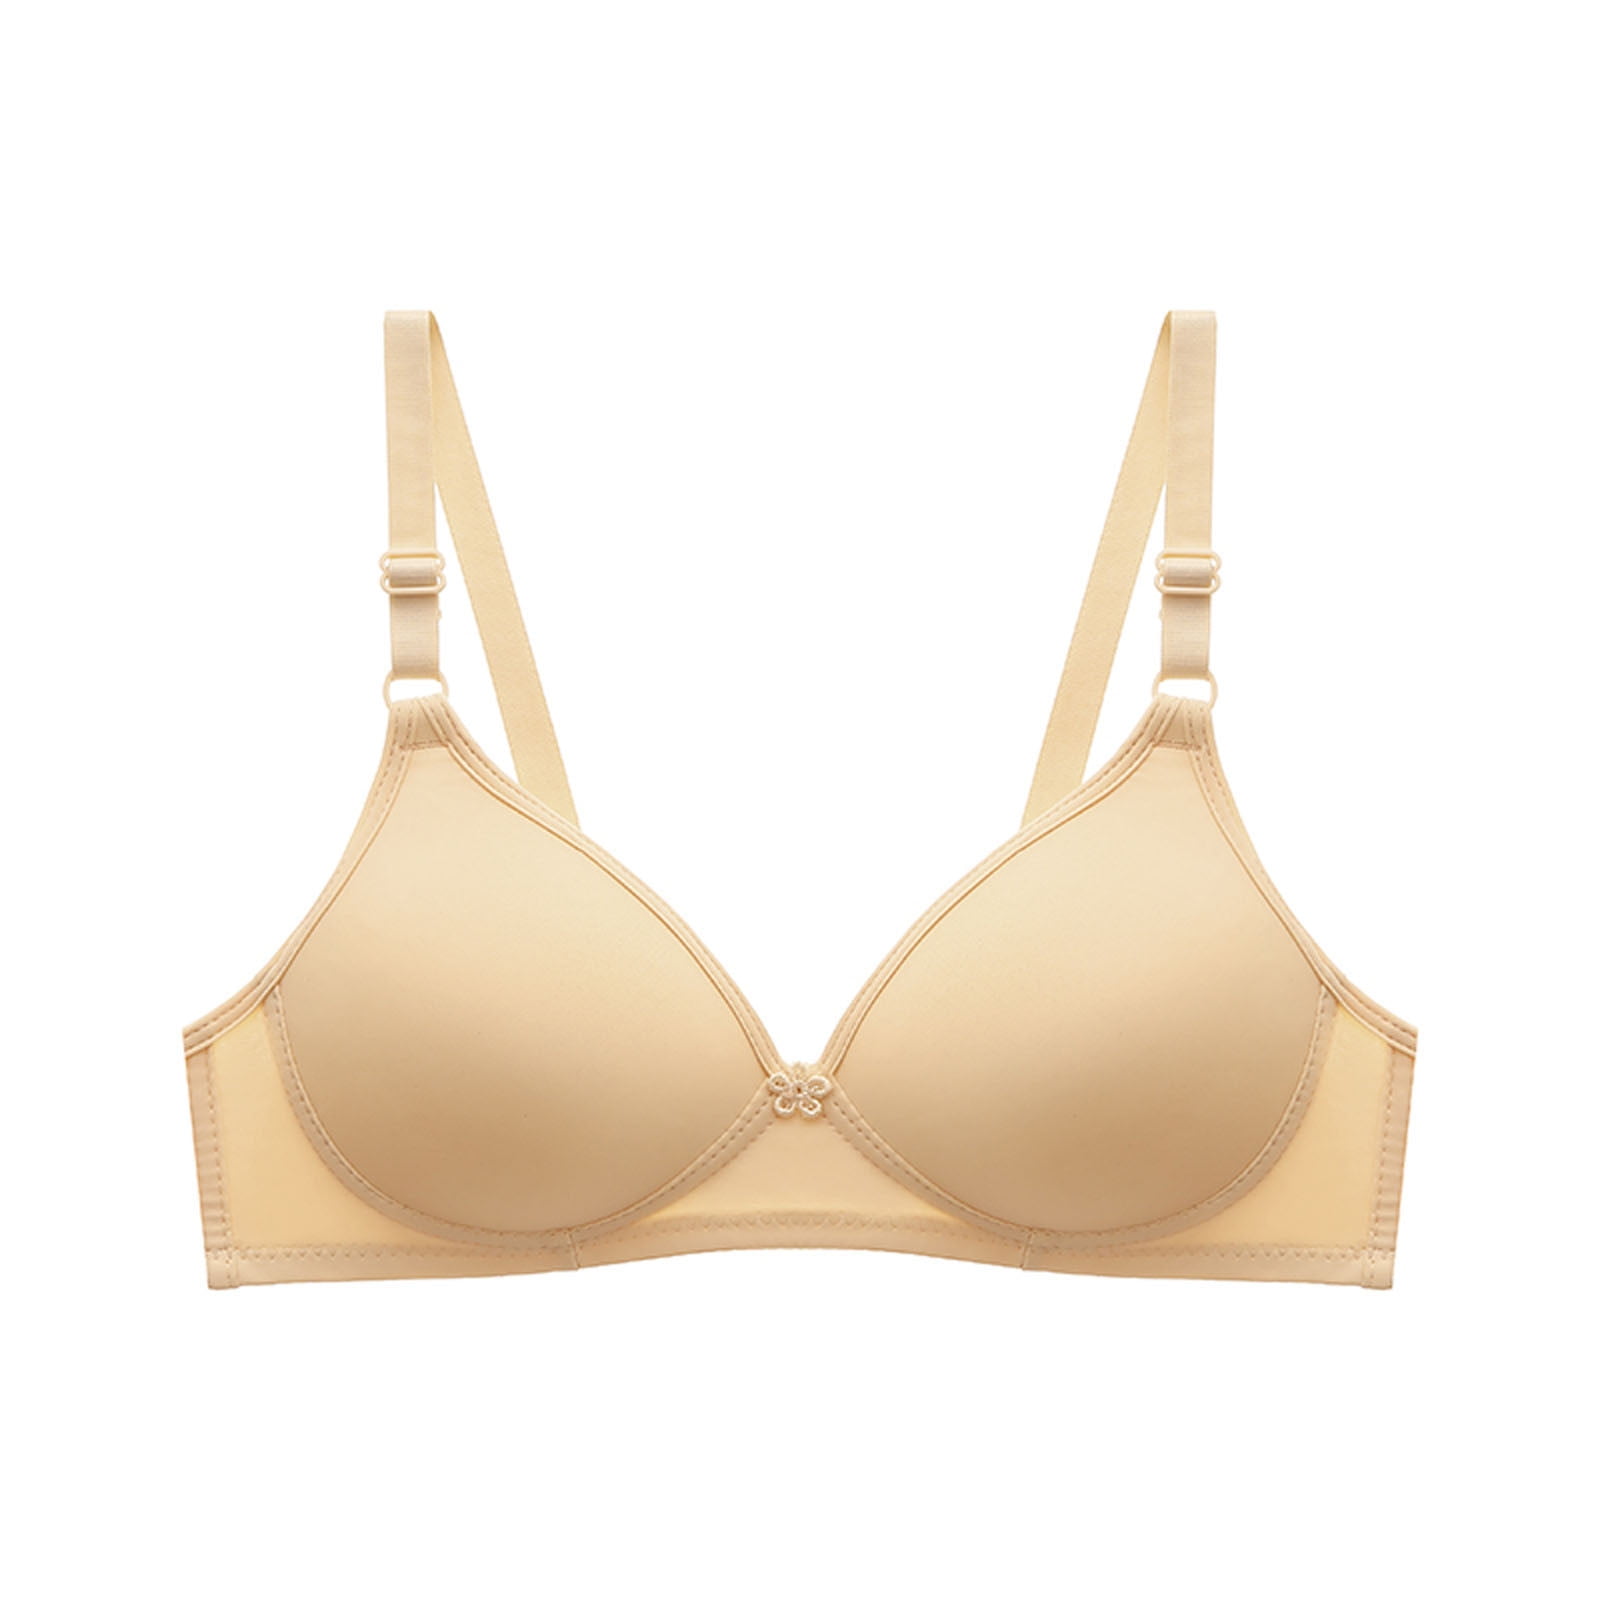 Samickarr Wireless Support Bras For Women Full Coverage And Lift